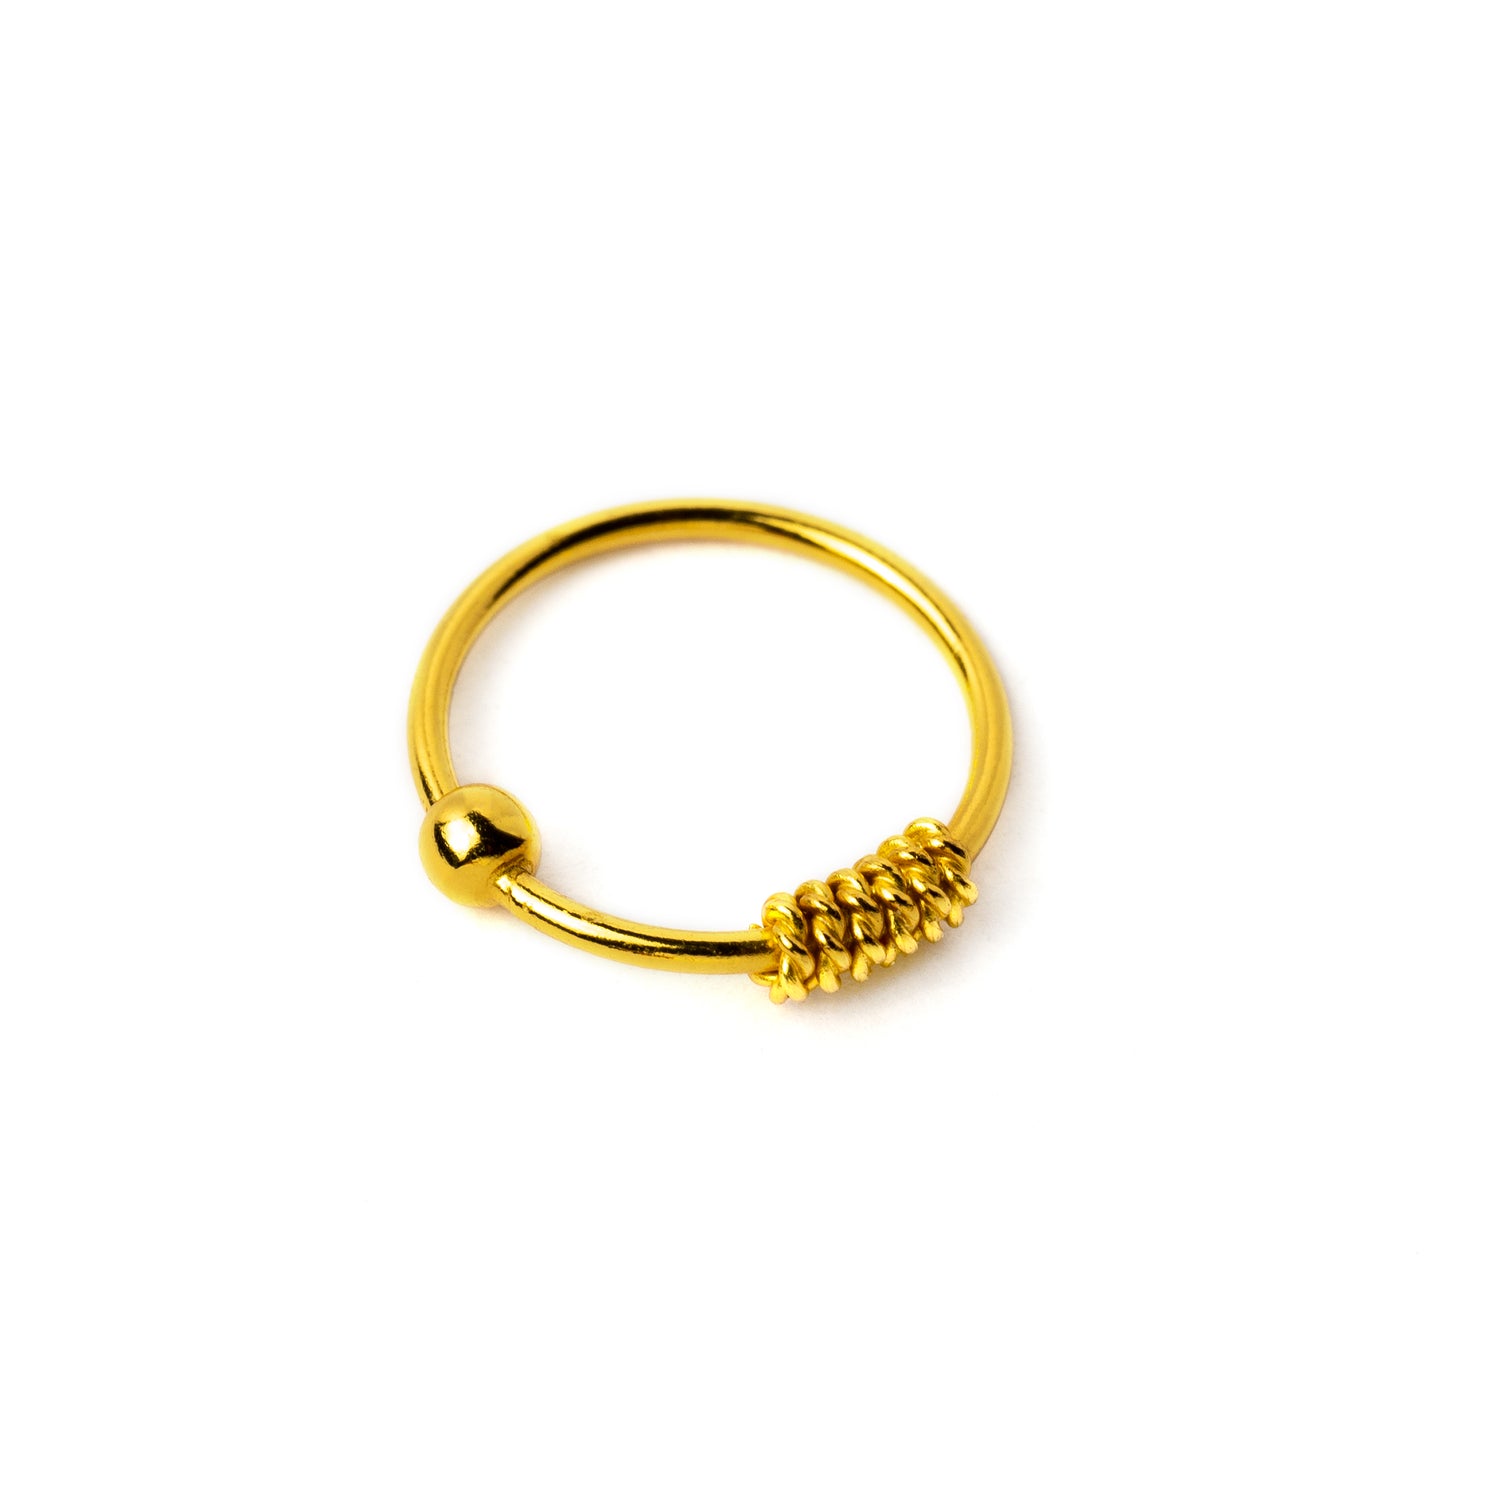 Gold coiled nose ring left side view